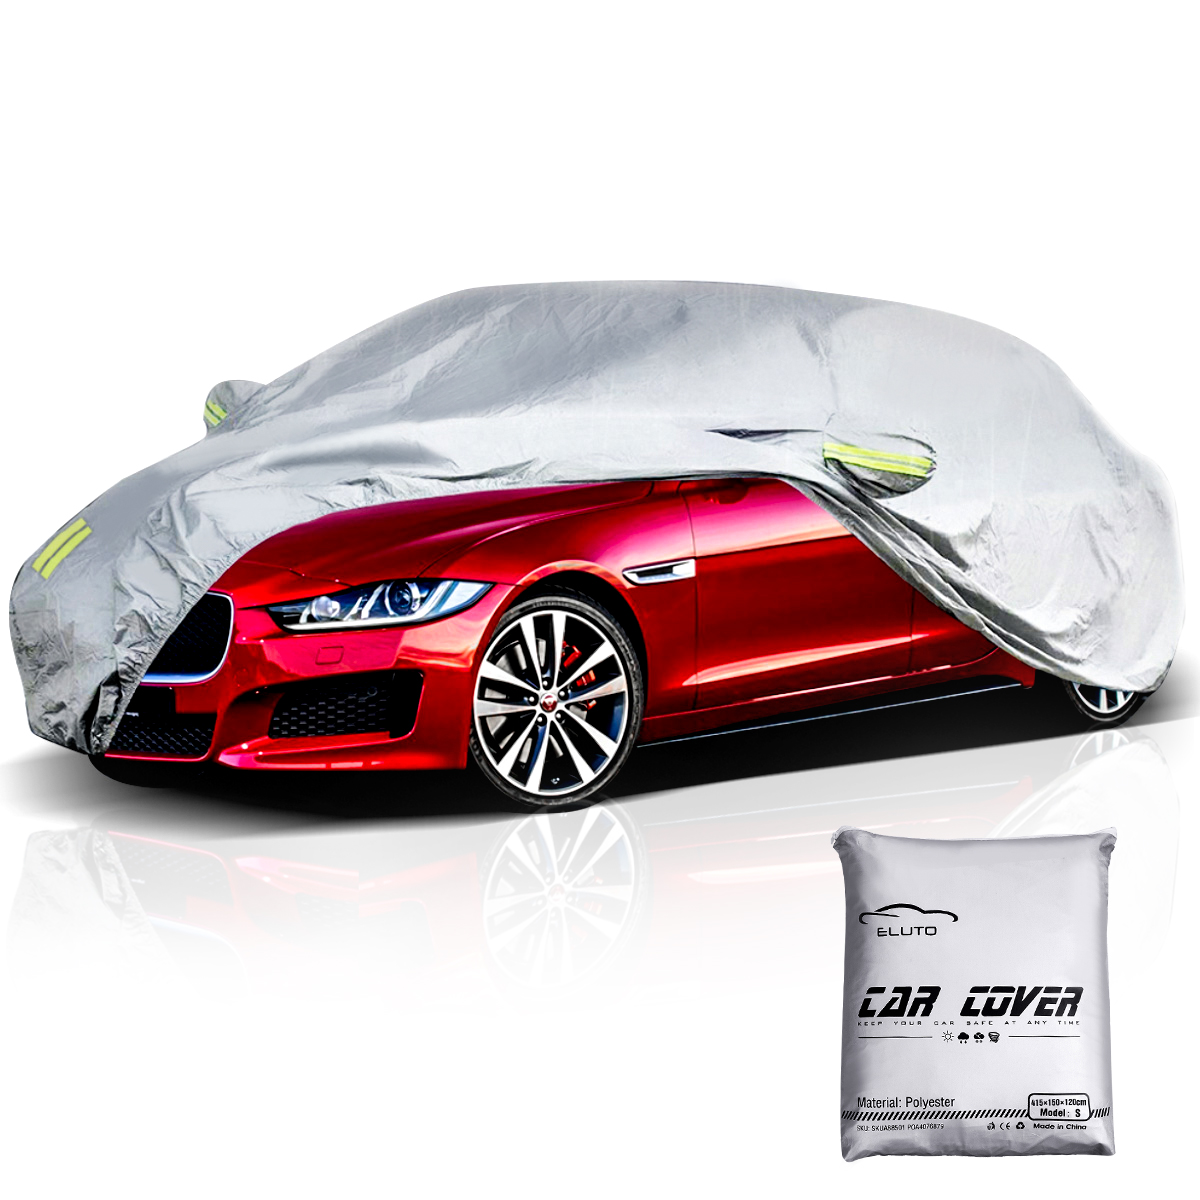 Find ELUTO Car Cover Outdoor Sedan Cover Waterproof Windproof All Weather Scratch Resistant Outdoor UV Protection with Adjustable Buckle Straps for Sale on Gipsybee.com with cryptocurrencies